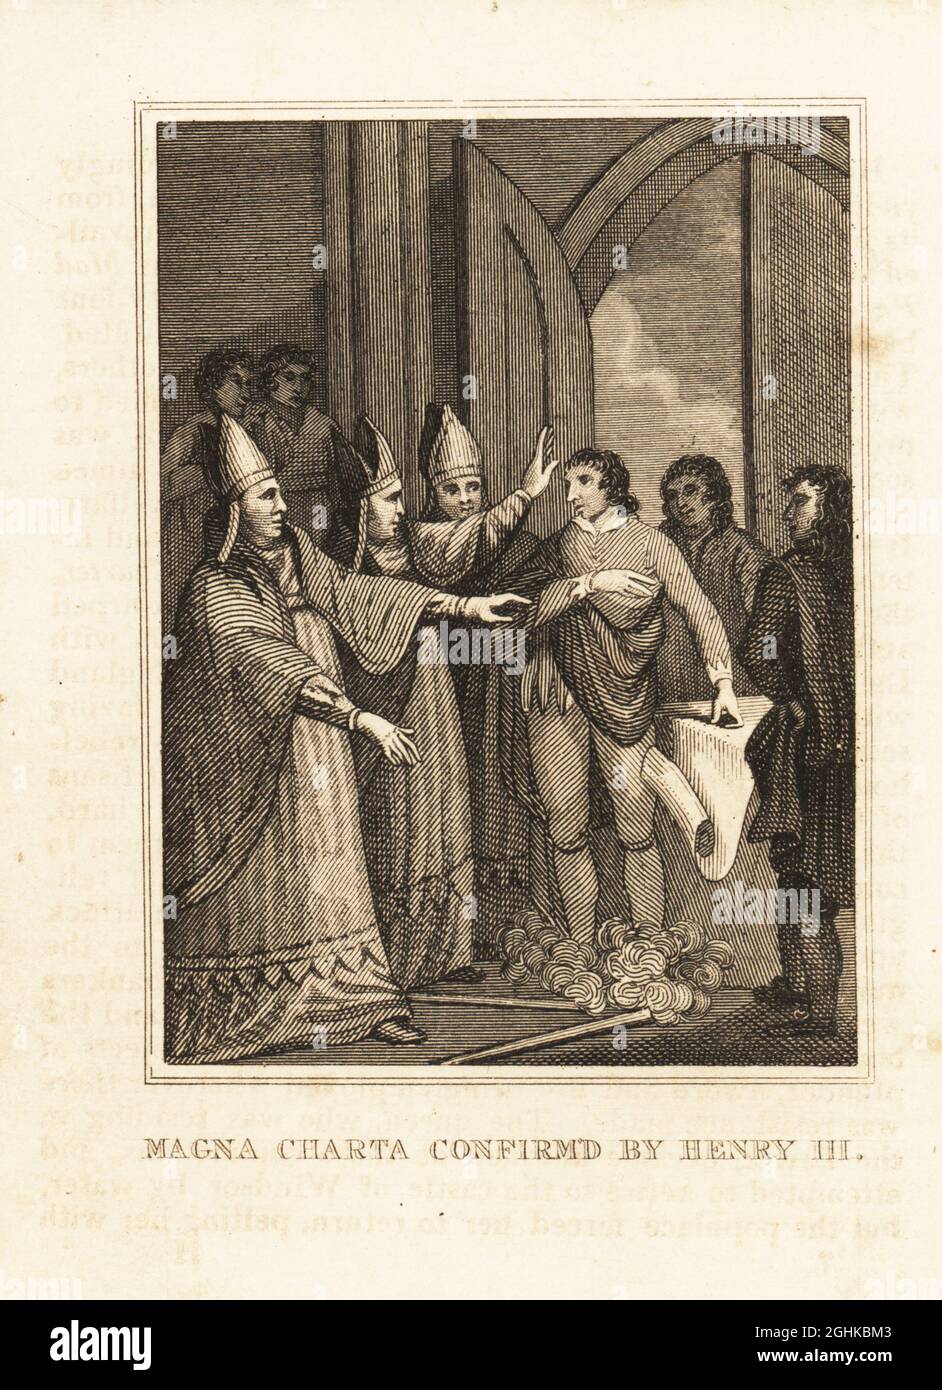 King Henry III re-issuing the Magna Carta and the Charter of the Forest in  1225, witnessed by archbishops, bishops and abbots. Magna Charta confirmed  by Henry III. Copperplate engraving from M. A.